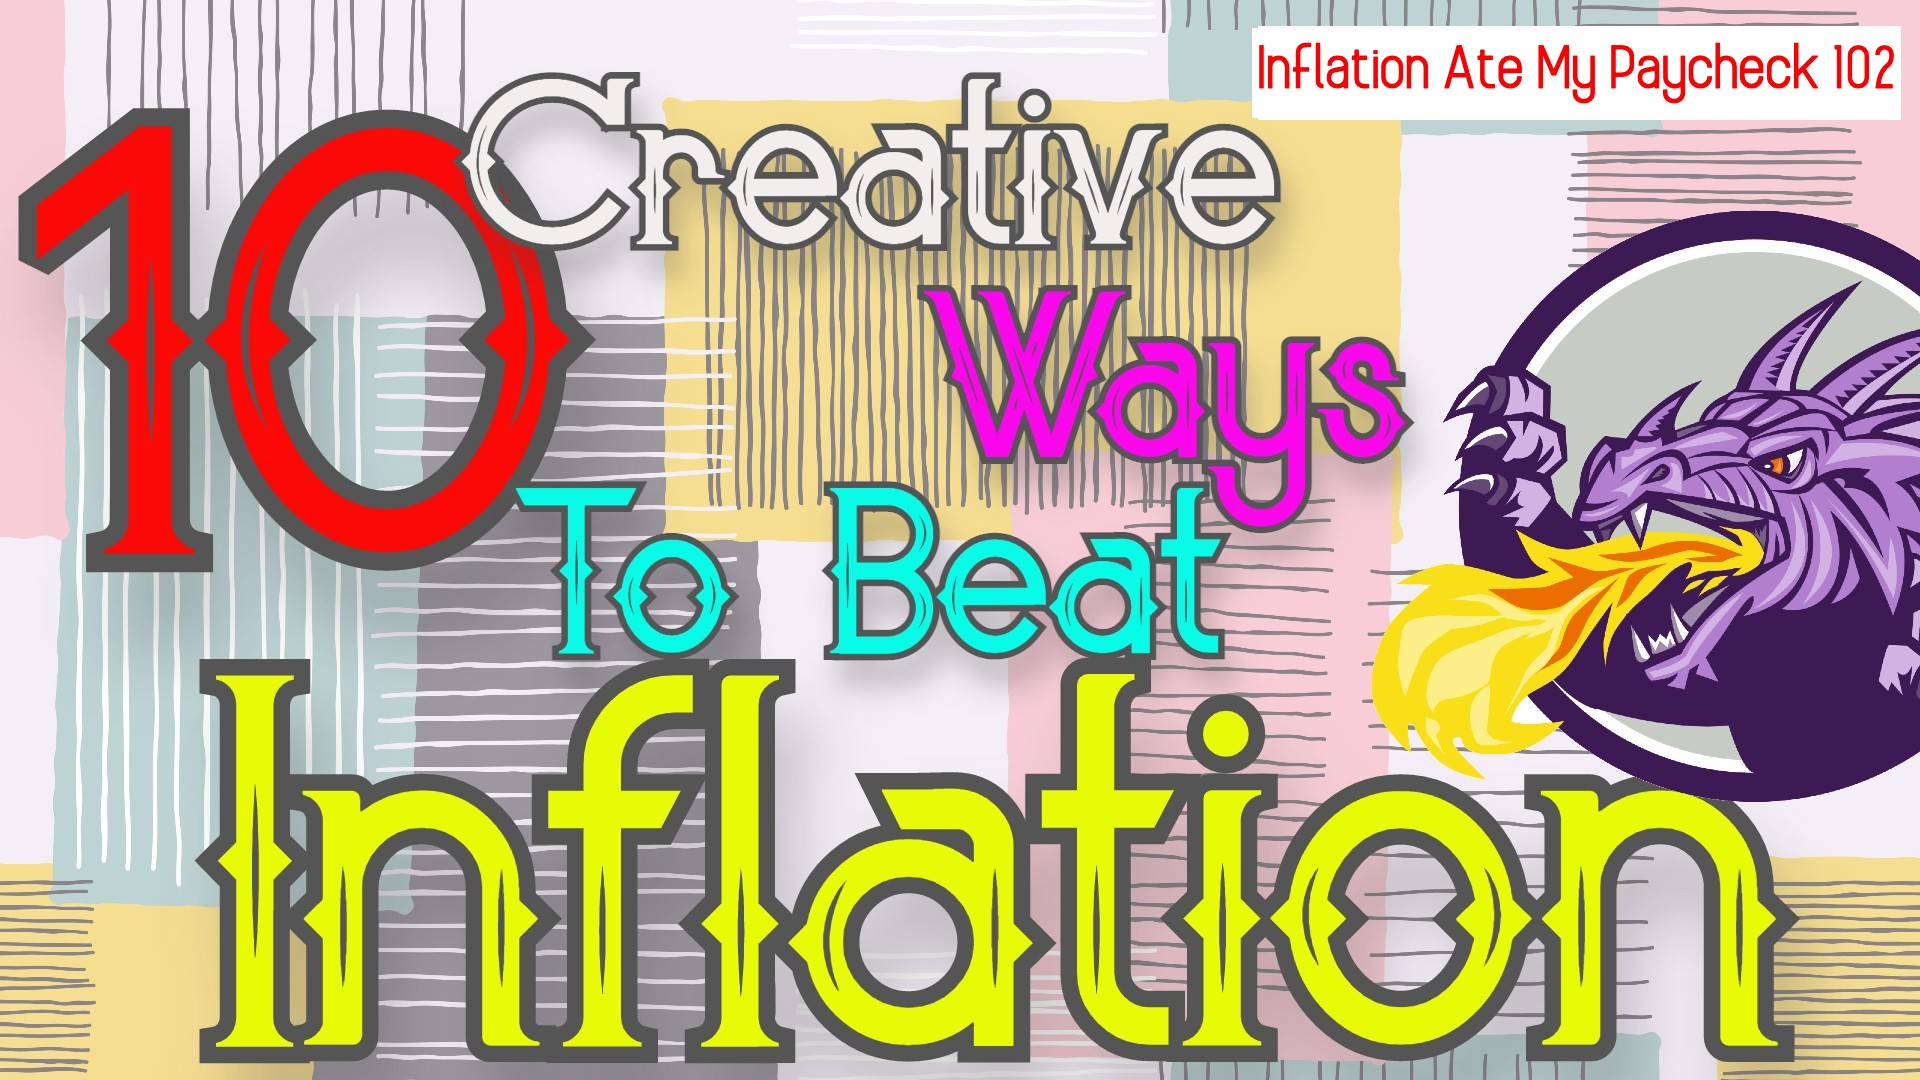 Inflation Ate My Paycheck 102: 10 Creative Ways to Beat Inflation